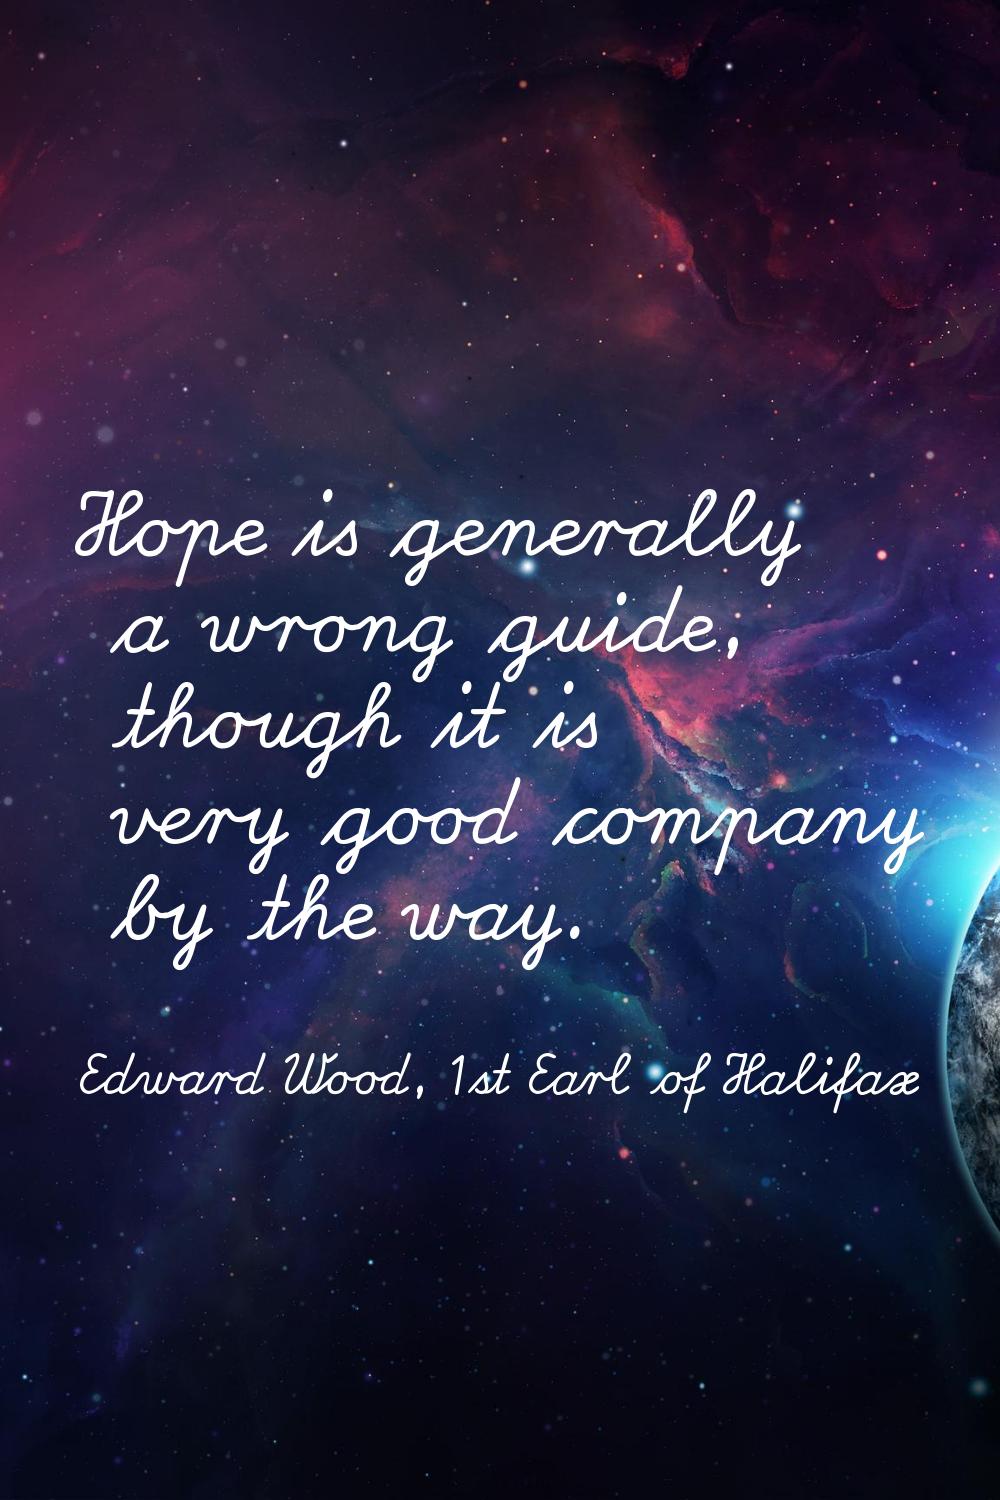 Hope is generally a wrong guide, though it is very good company by the way.